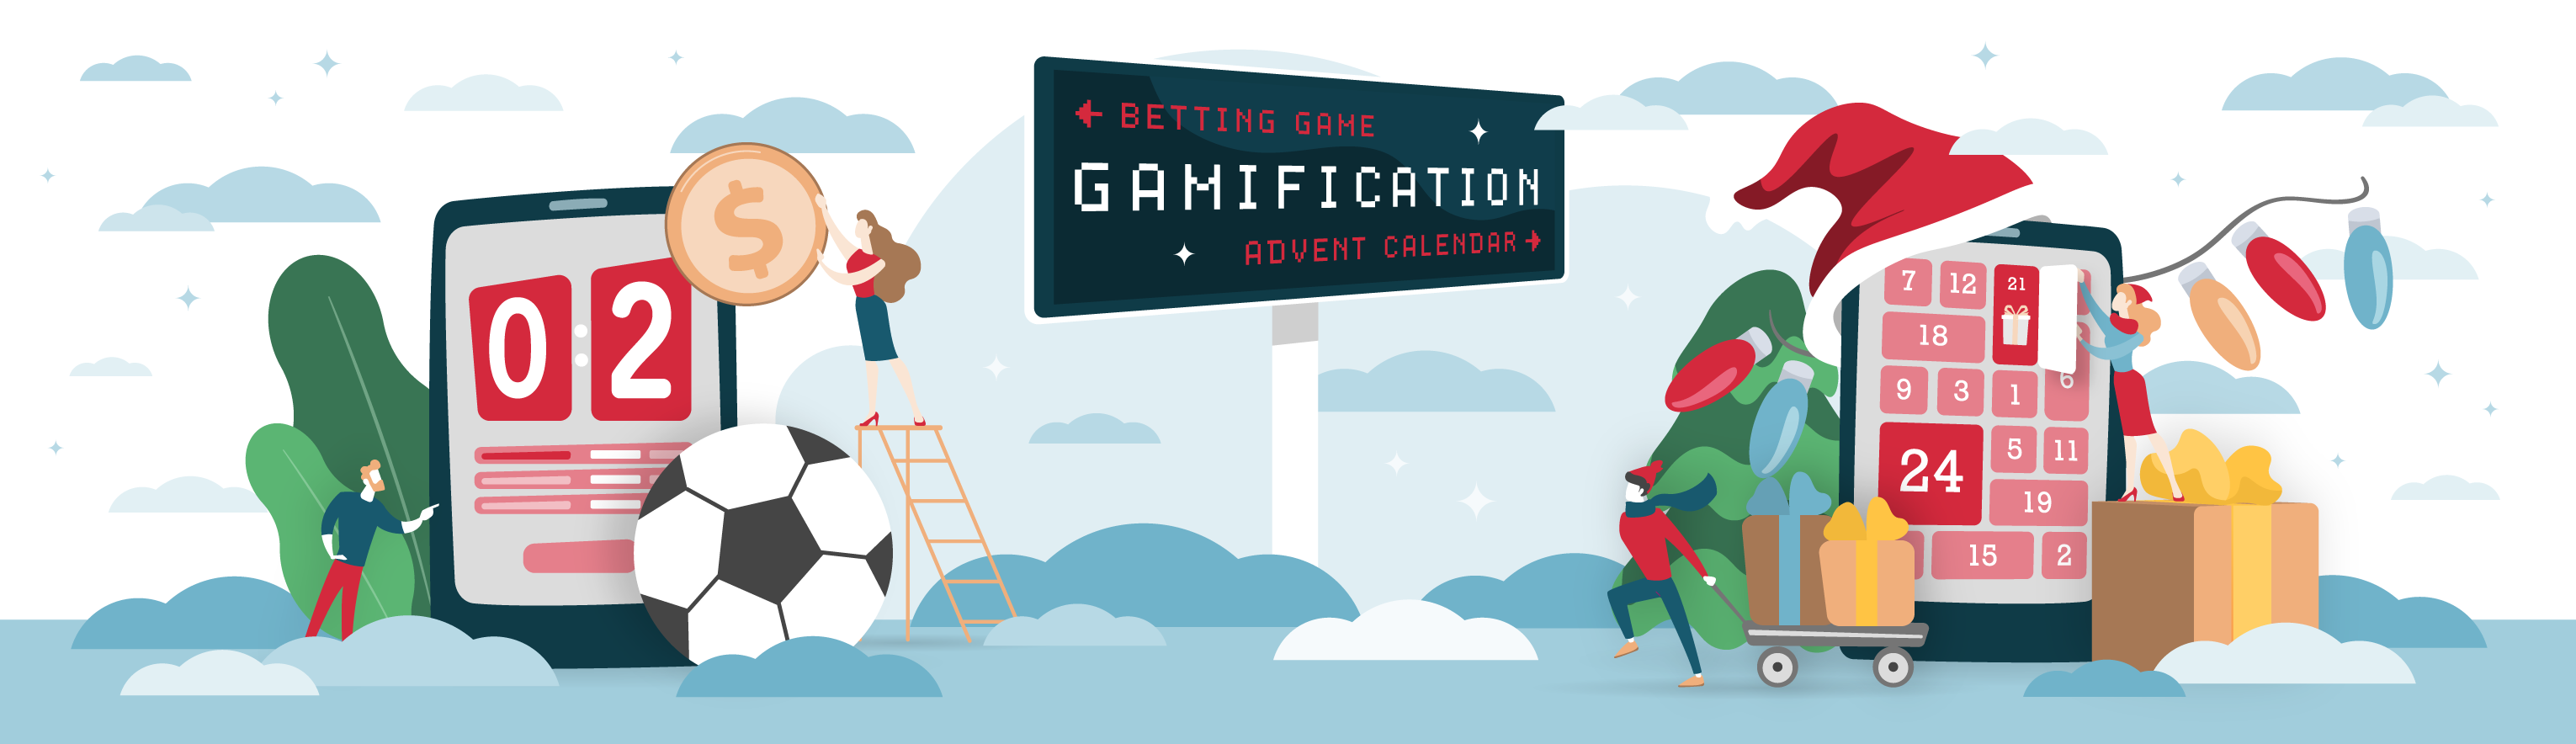 gamification solutions online advent calendar and world cup bet game